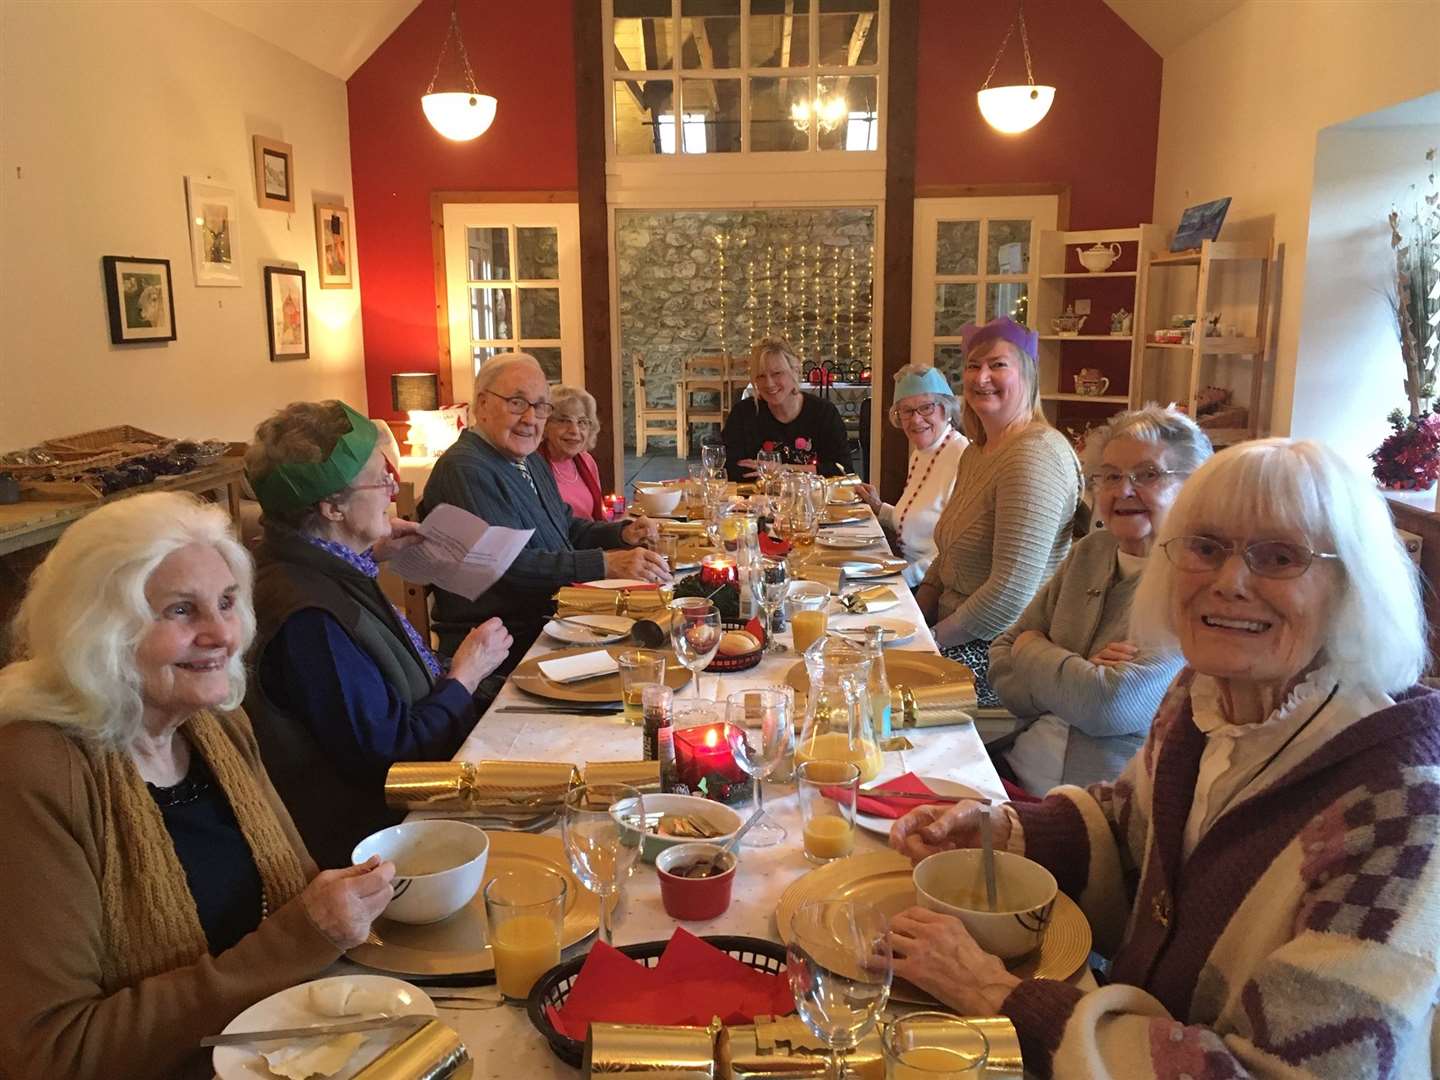 A special Christmas Day meal was held at the Courtyard Café in Drumnadrochit.